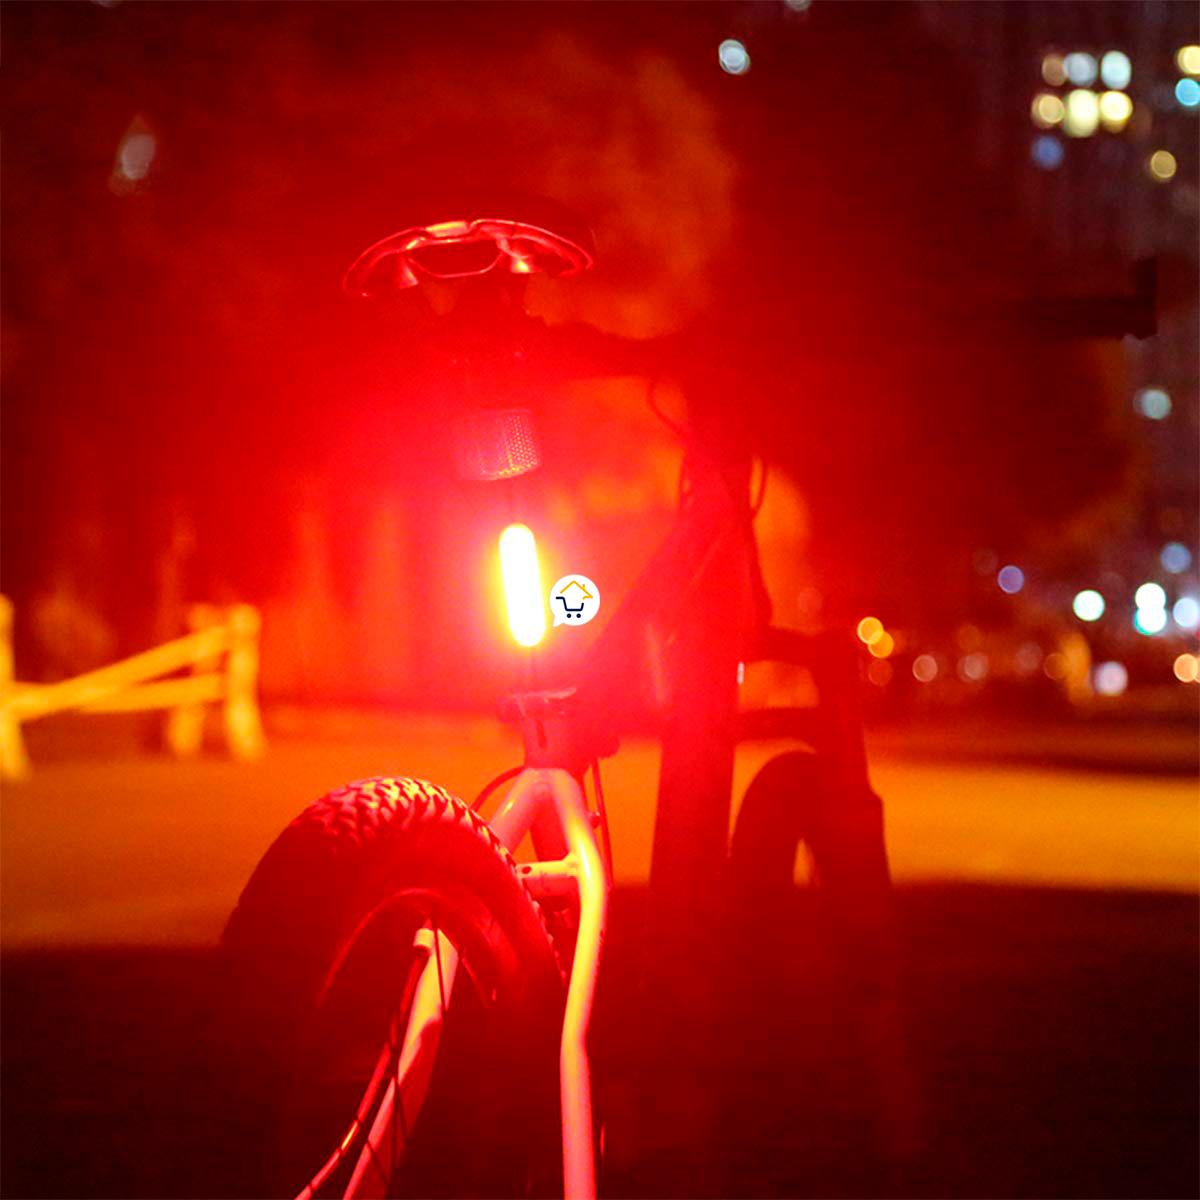 Stop Bicicleta Impermeable Luz Led Recargable Ciclismo OF399